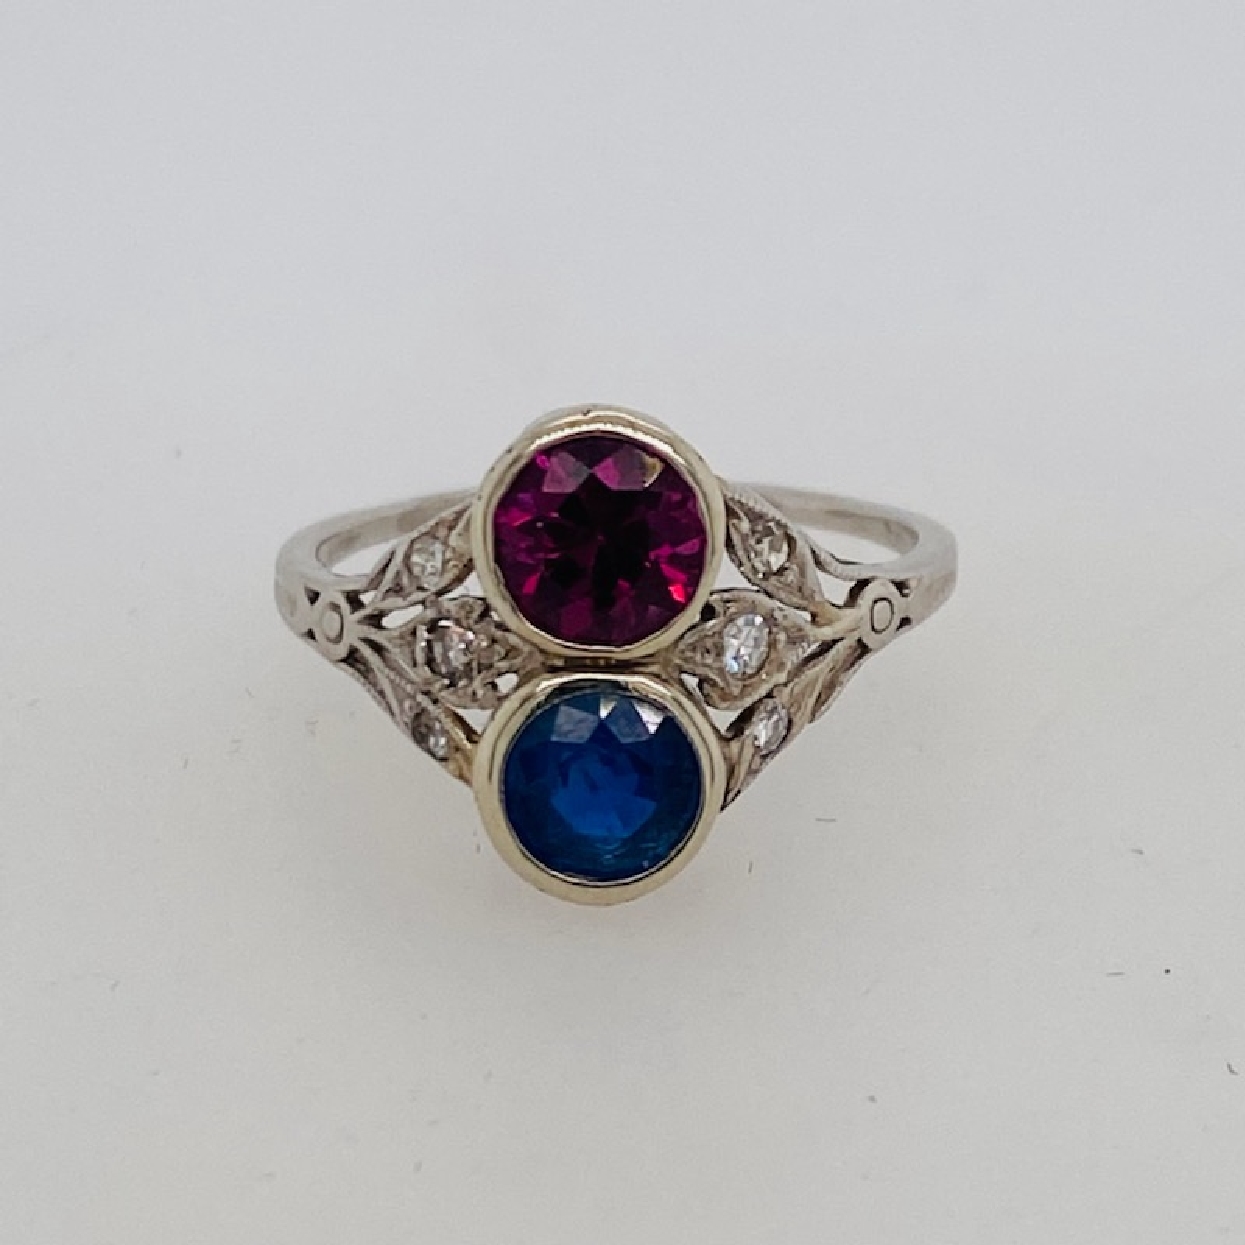 Edwardian Platinum Sapphire and Rubellite Ring with Diamond Accents; Size 6.75

Circa 1900